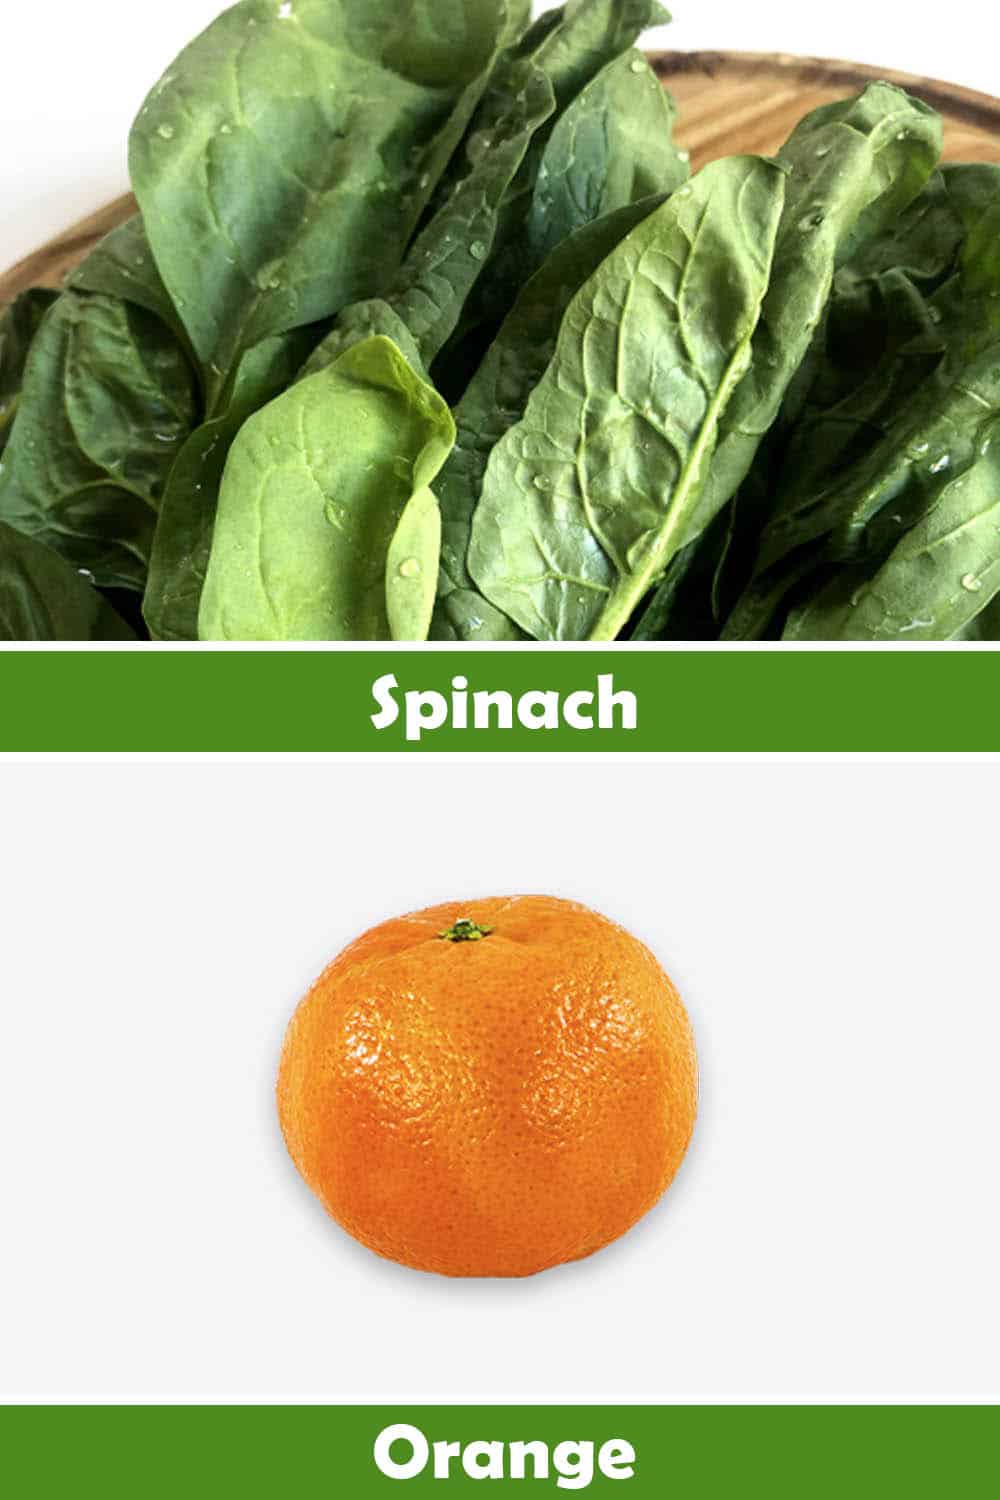 SPINACH AND ORANGE